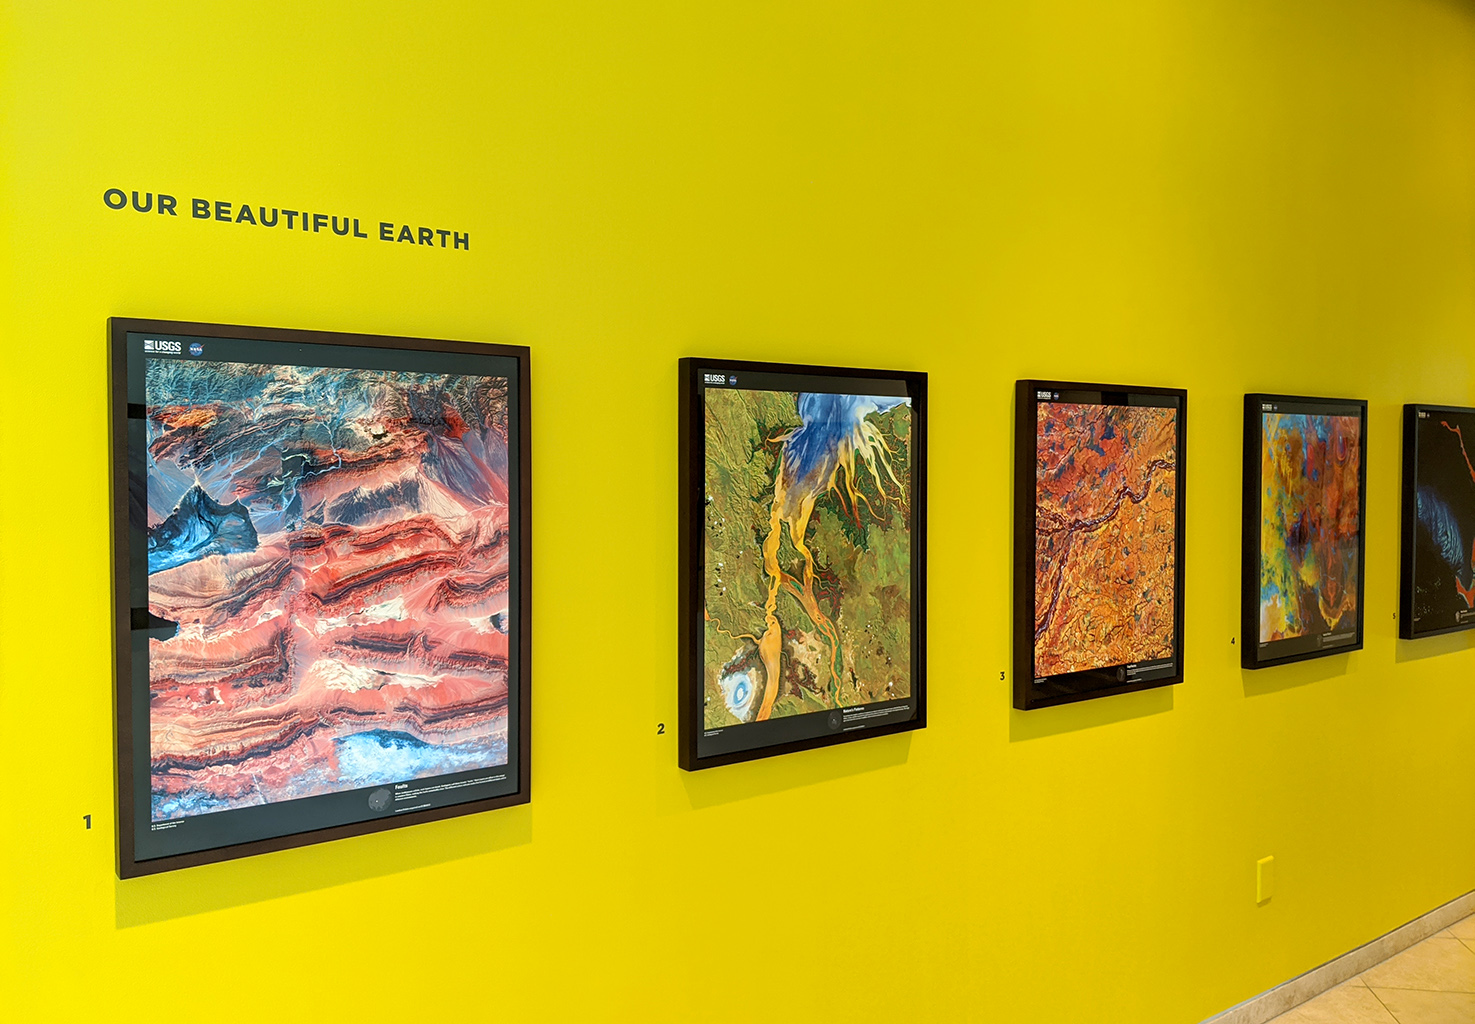 Earth Day 2020: “Mother Earth as Art”